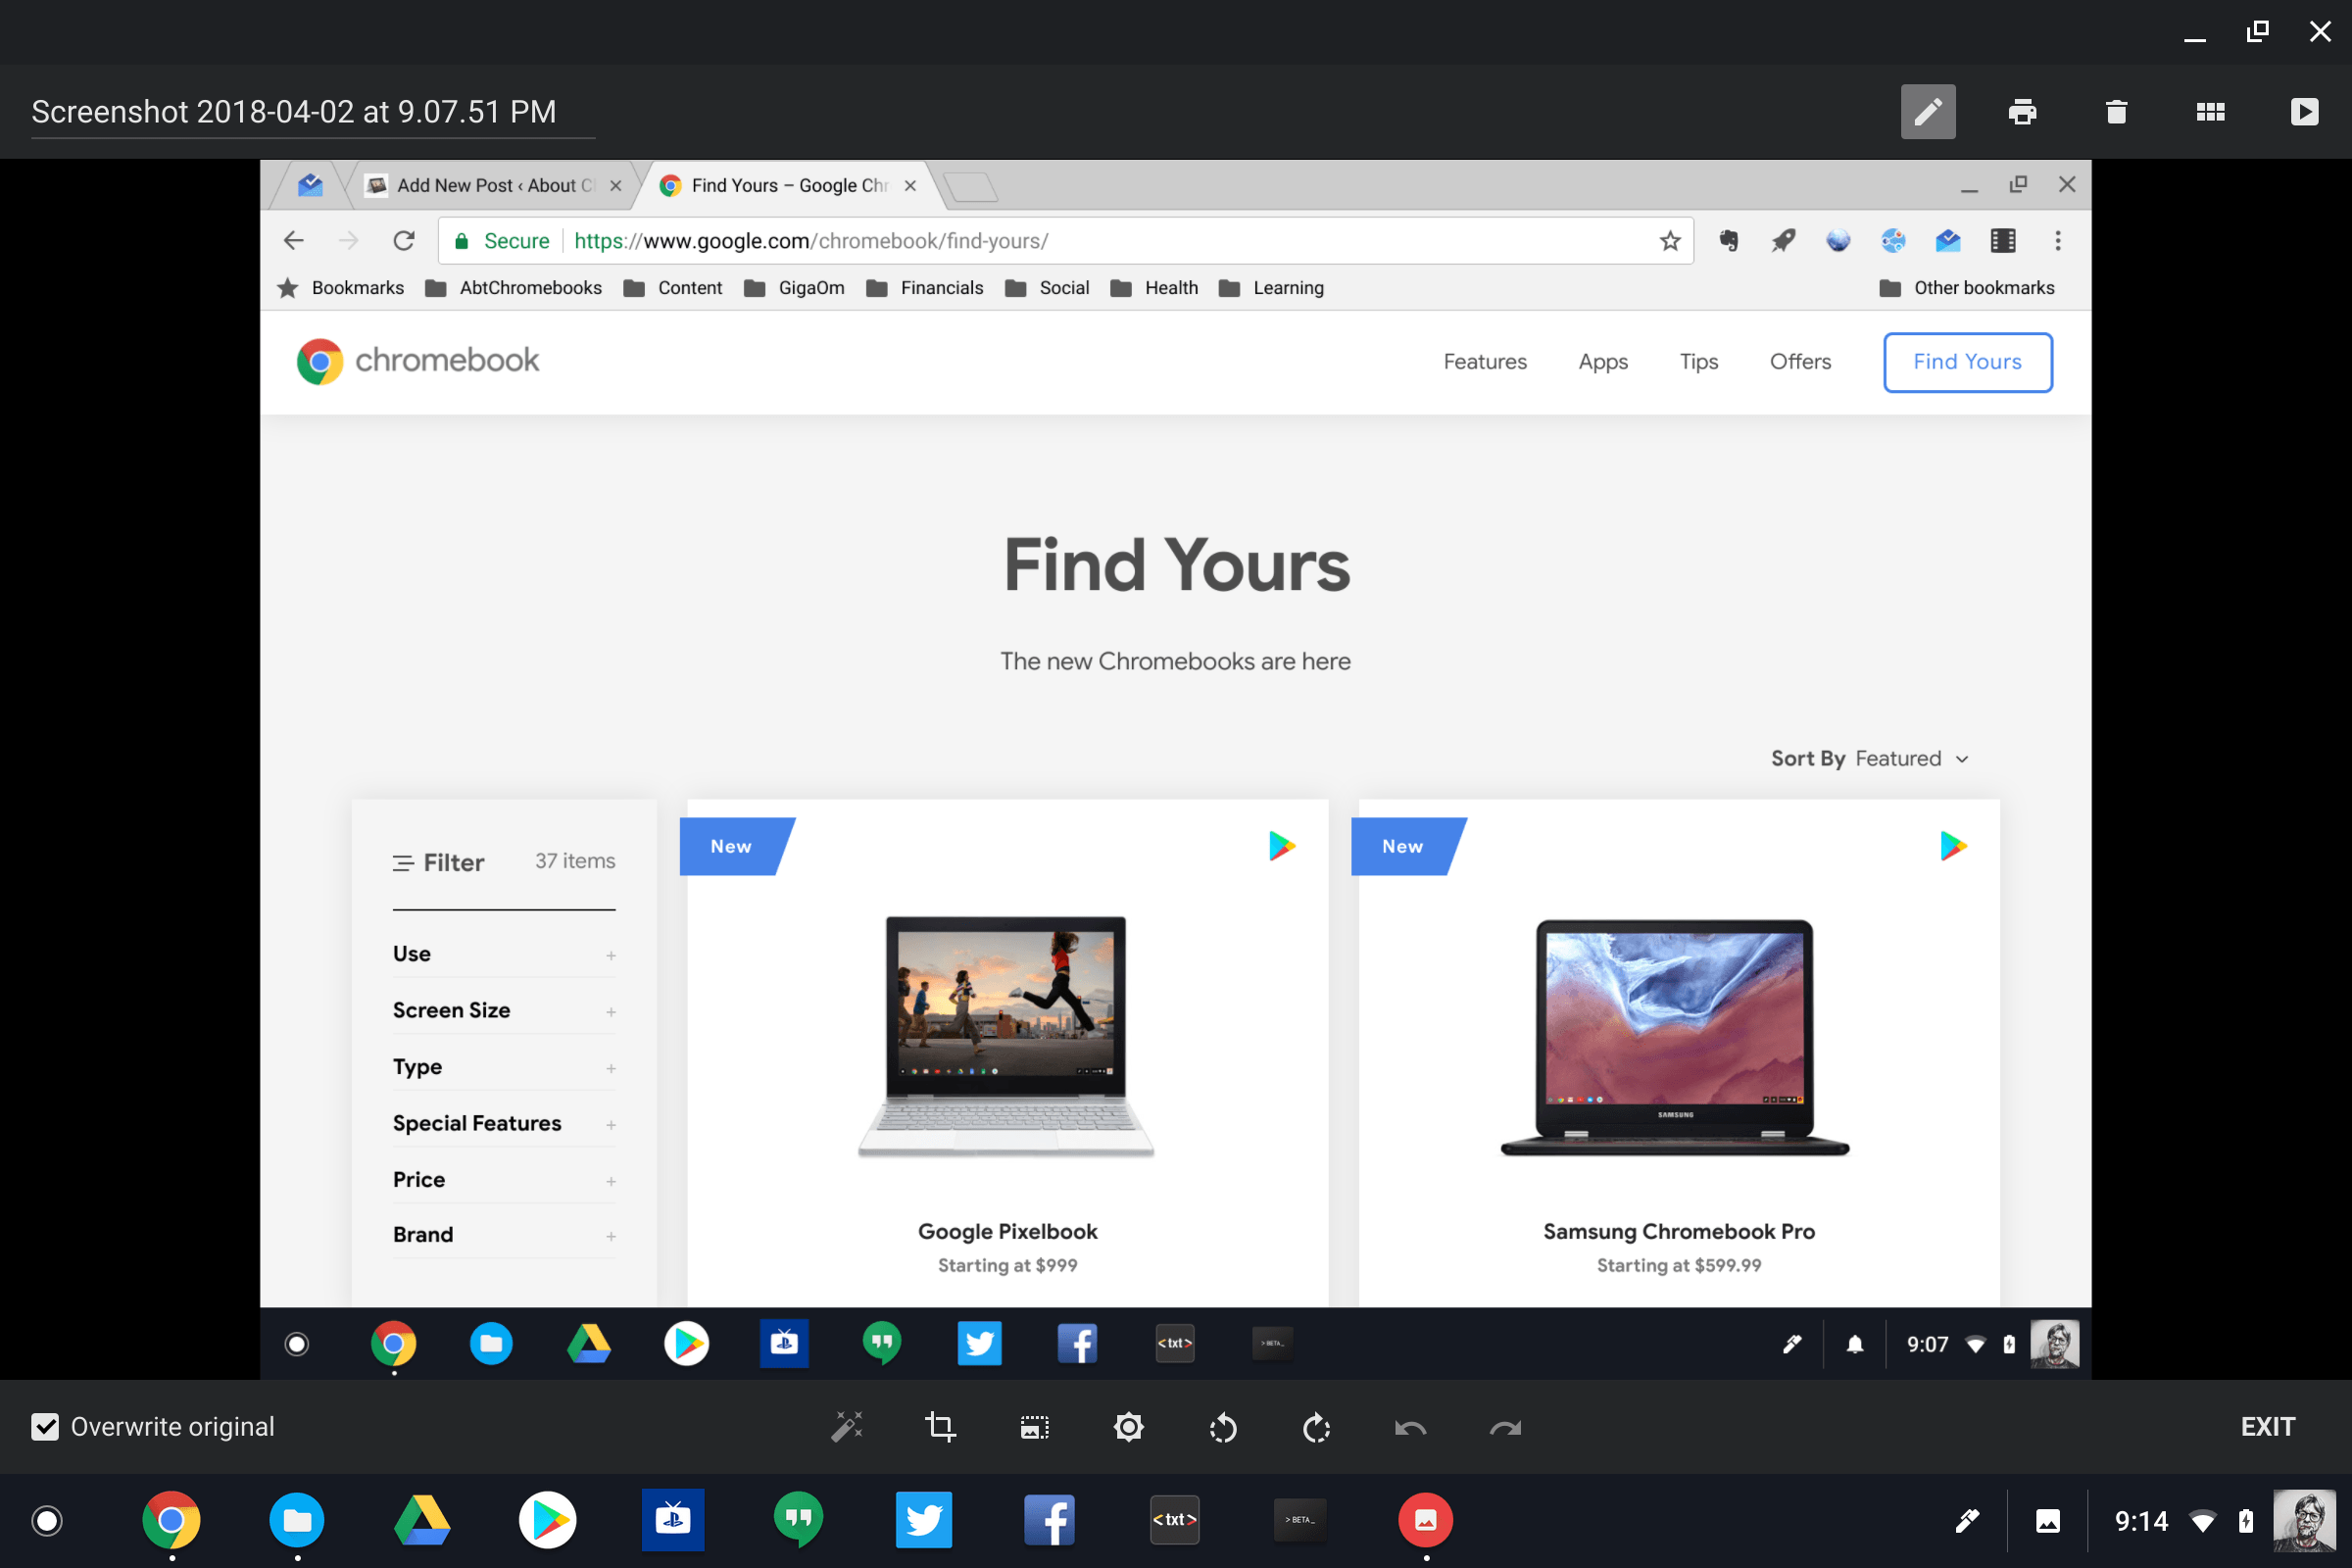 How to take and edit a screenshot on a Chromebook